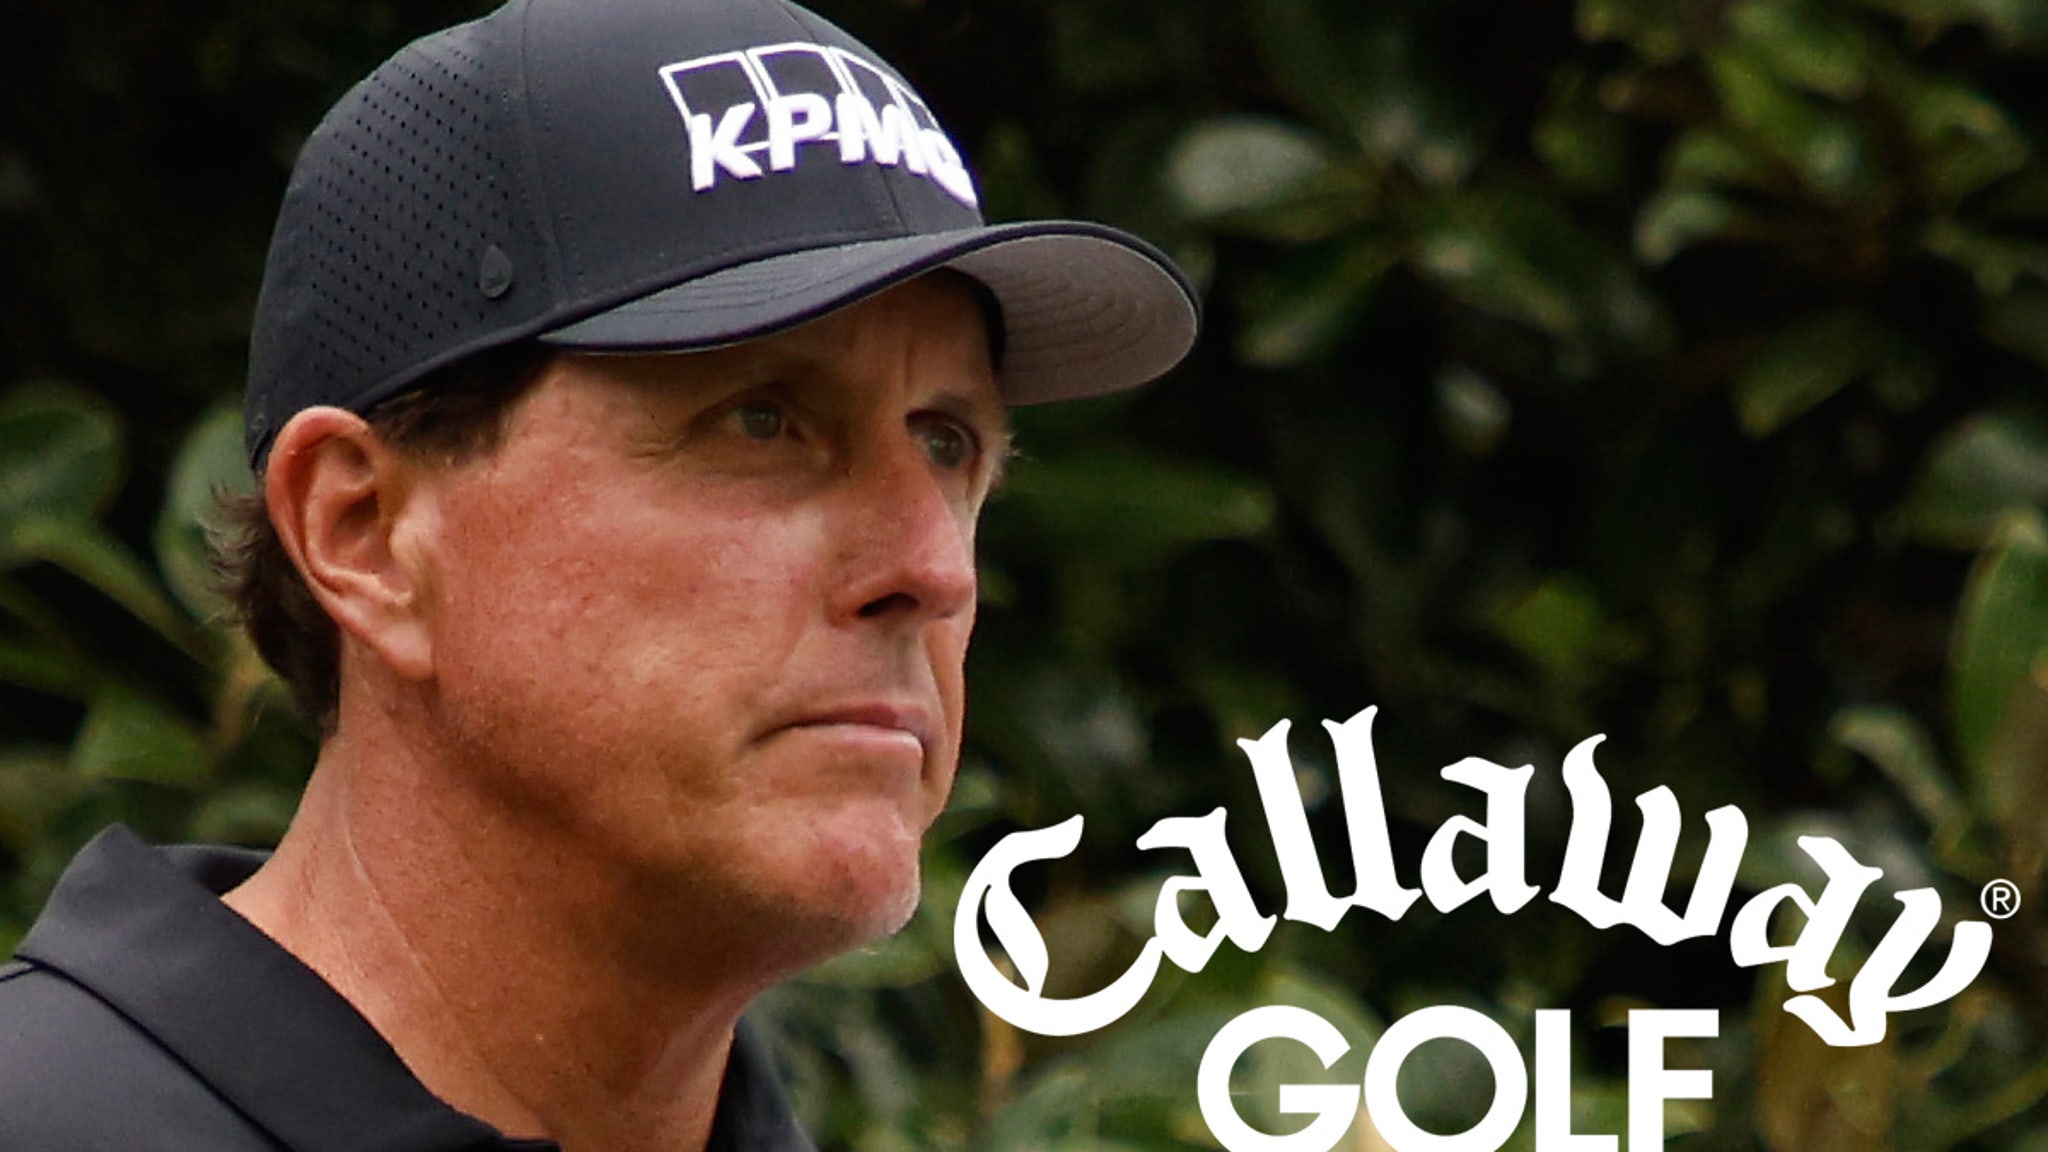 Phil Mickelson And Callaway Golf Sponsorship ‘Paused’ After Saudi Comments